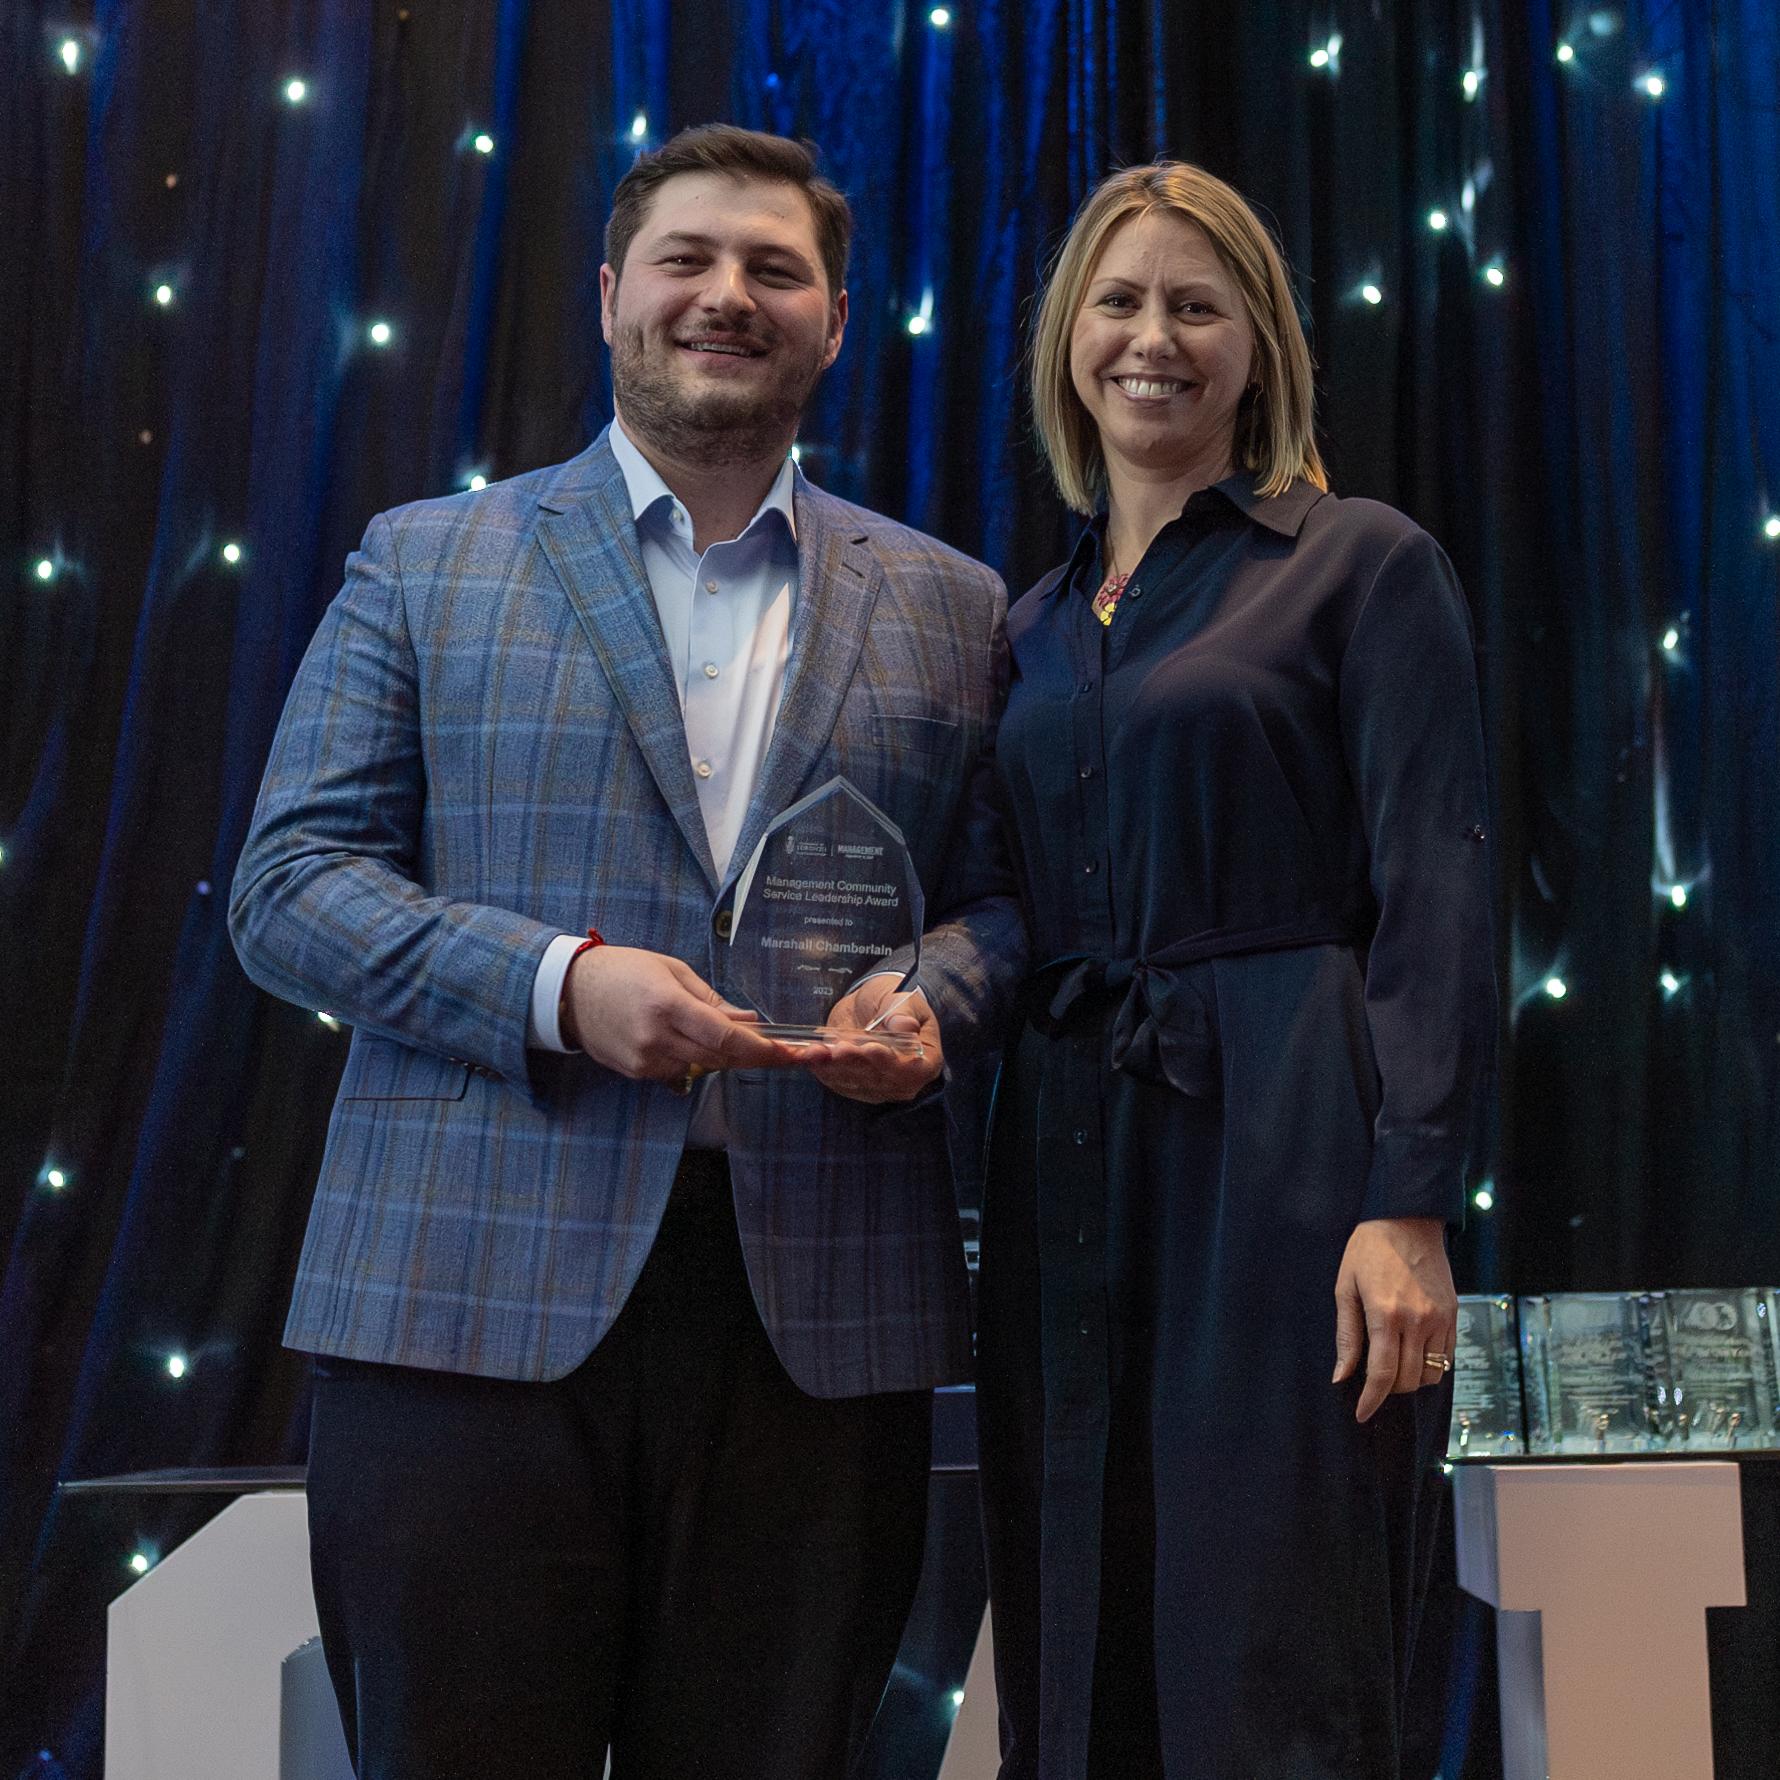 U of T Scarborough Management and International Business alumnus Marshall Chamberlain wearing a plaid jacket holds a glass award in front of a starry background with floor-to-ceiling drapes.